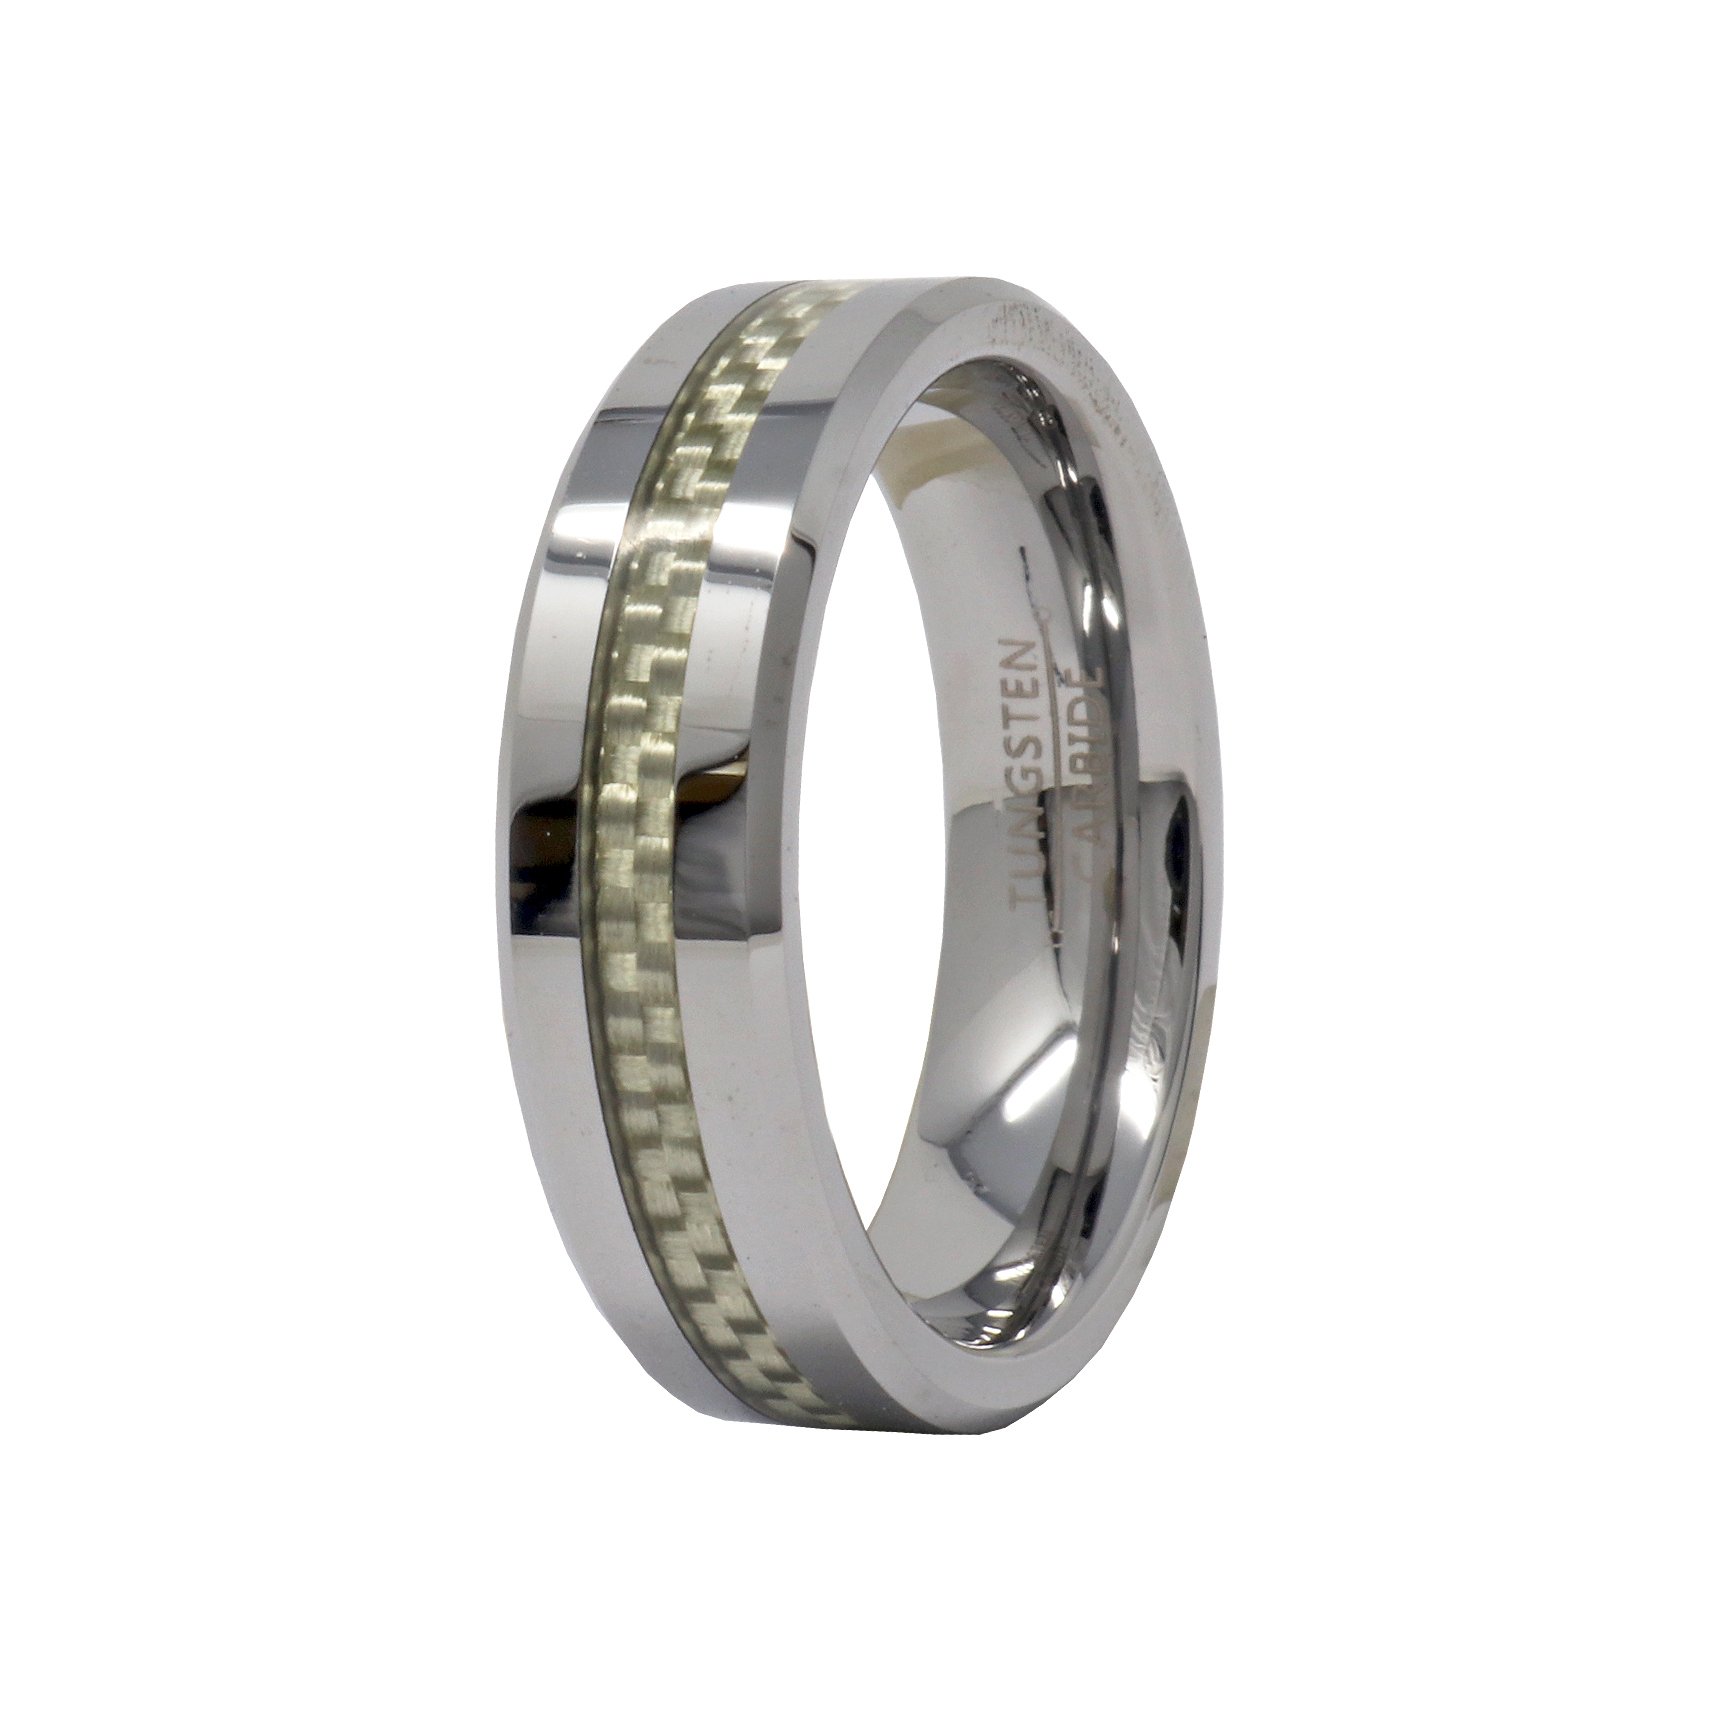 Tungsten Ring Size 9.5 - 6mm Gray Carbon Fiber Inlay